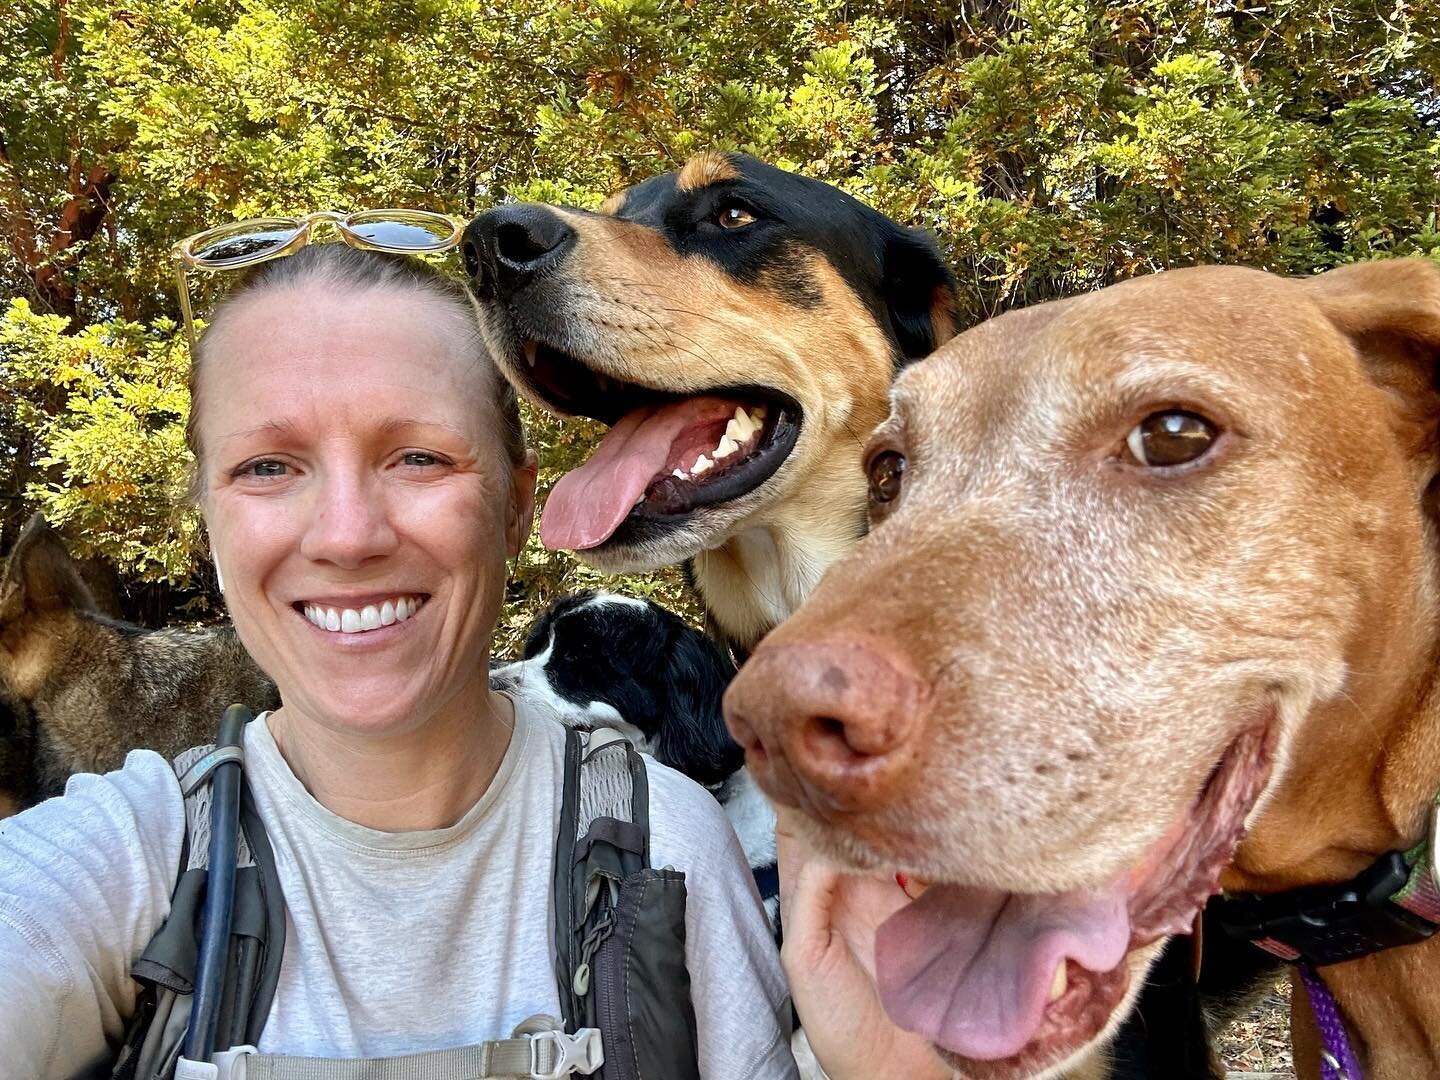 Another beautiful day on the mountain. It was warm out and my feet hurt. So, we backed off and had a cuddle huddle. #marincanineadventures #doglife #happydog #dogsofinsta #dogsofinstagram #dogohotography #marindogs #traildogs #hikewithdogs #outdoordo